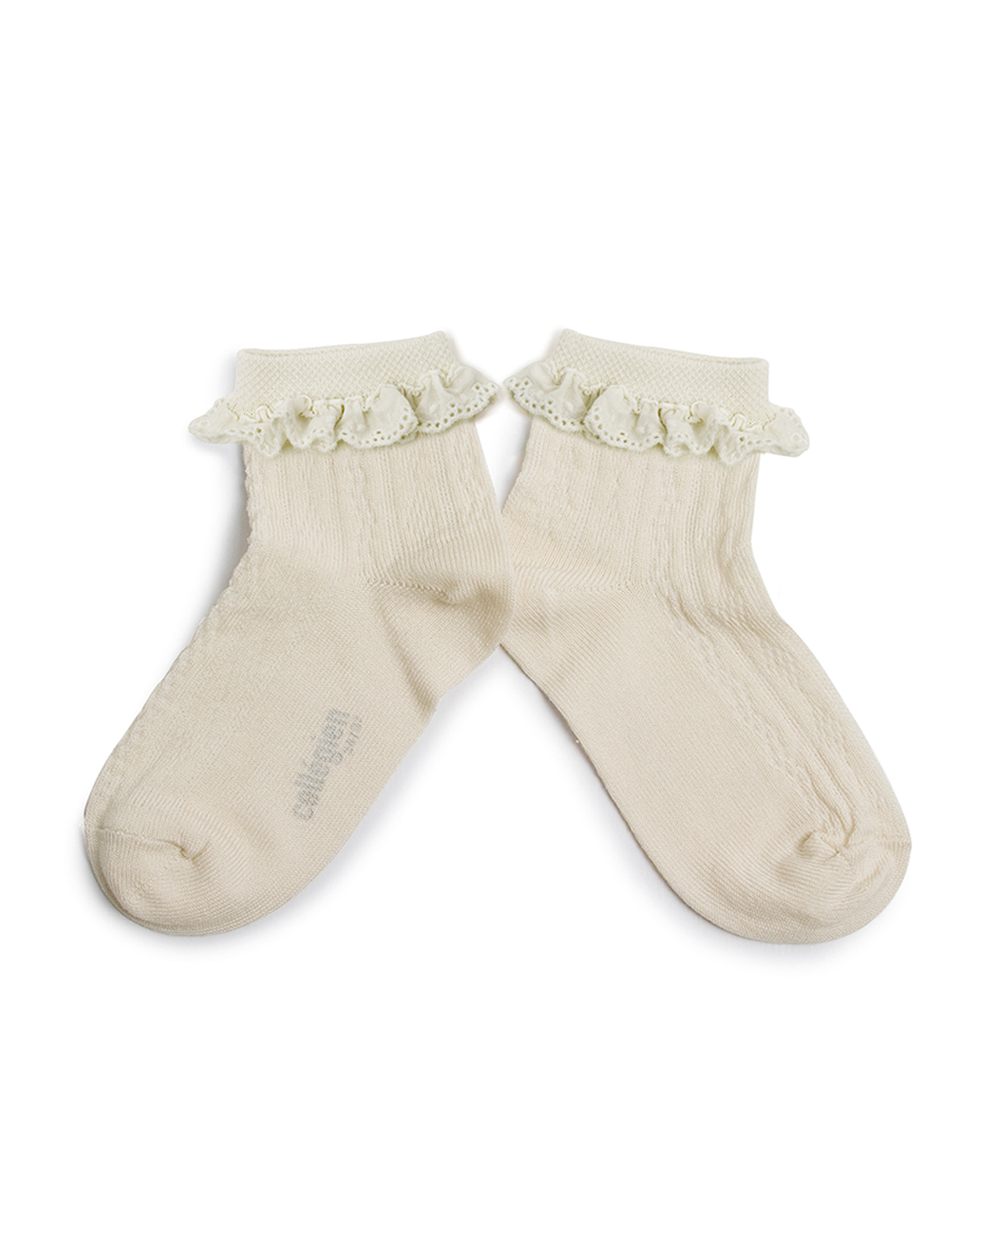 [Collégien] Marie-Antoinette - Lightweight Pointelle Socks with Broderie Anglaise - Doux Agneaux [21-23]